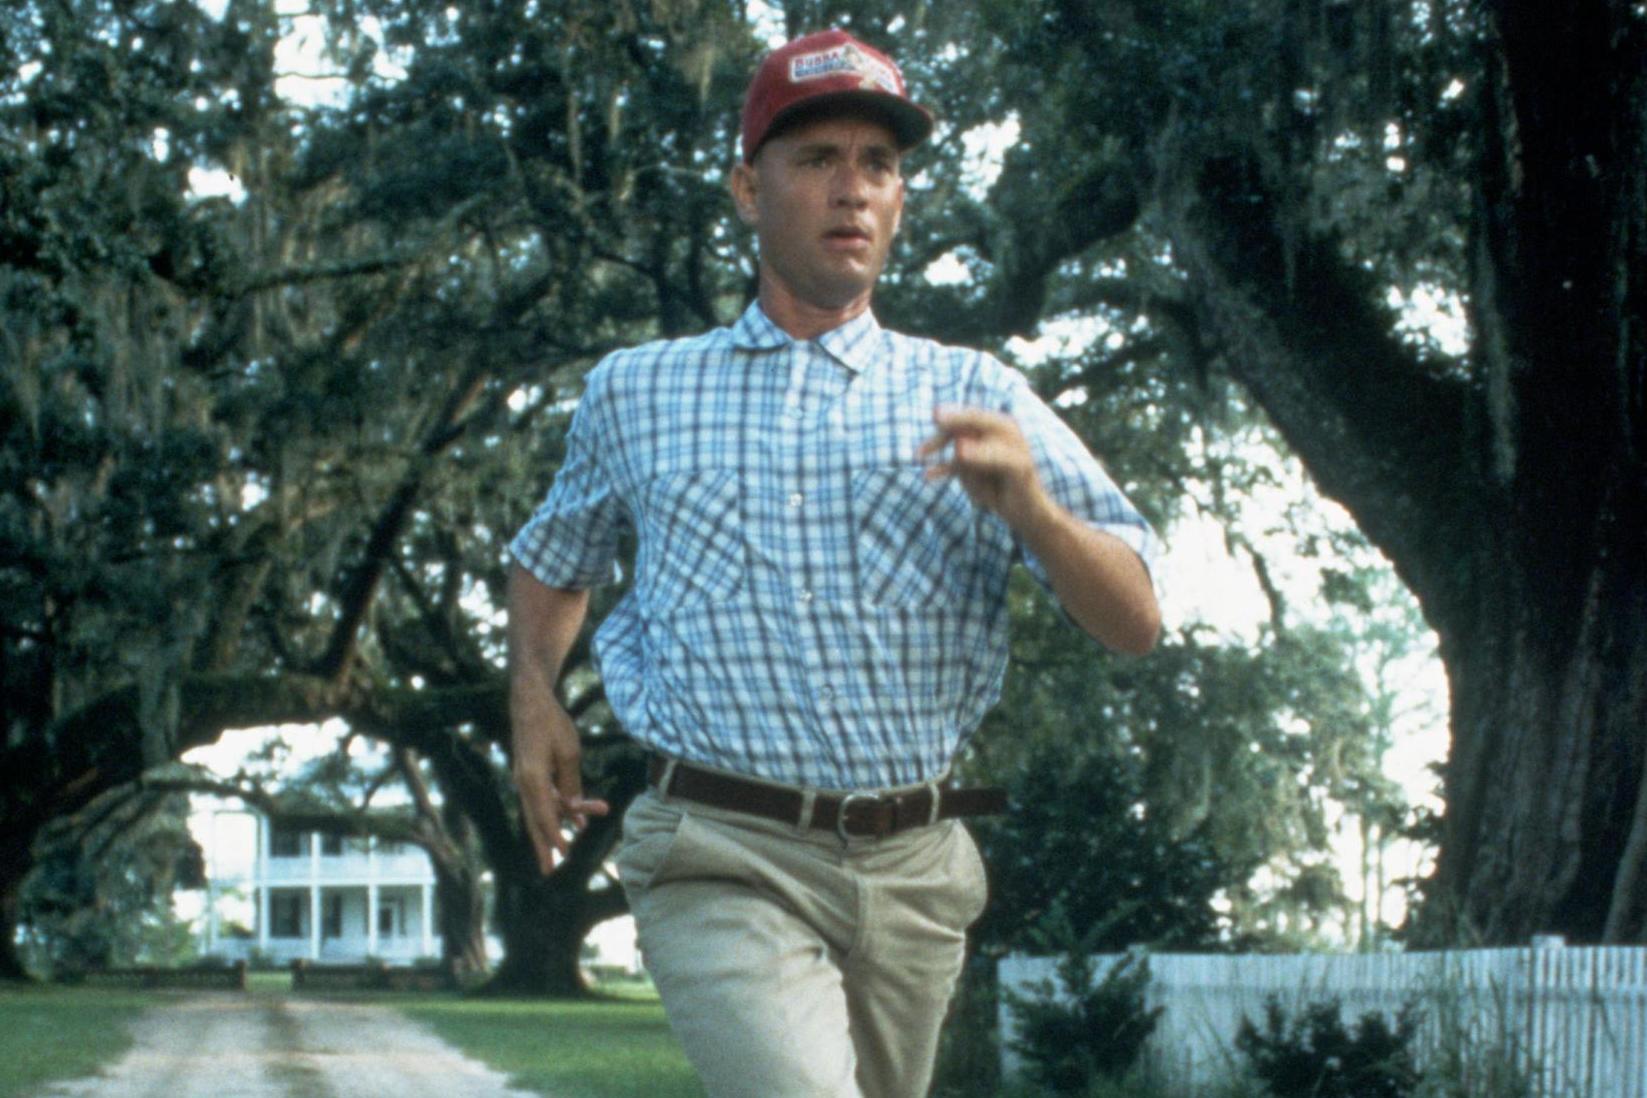 Tom Hanks helped pay for the iconic running scene in 'Forrest Gump' after Paramount refused to fund it